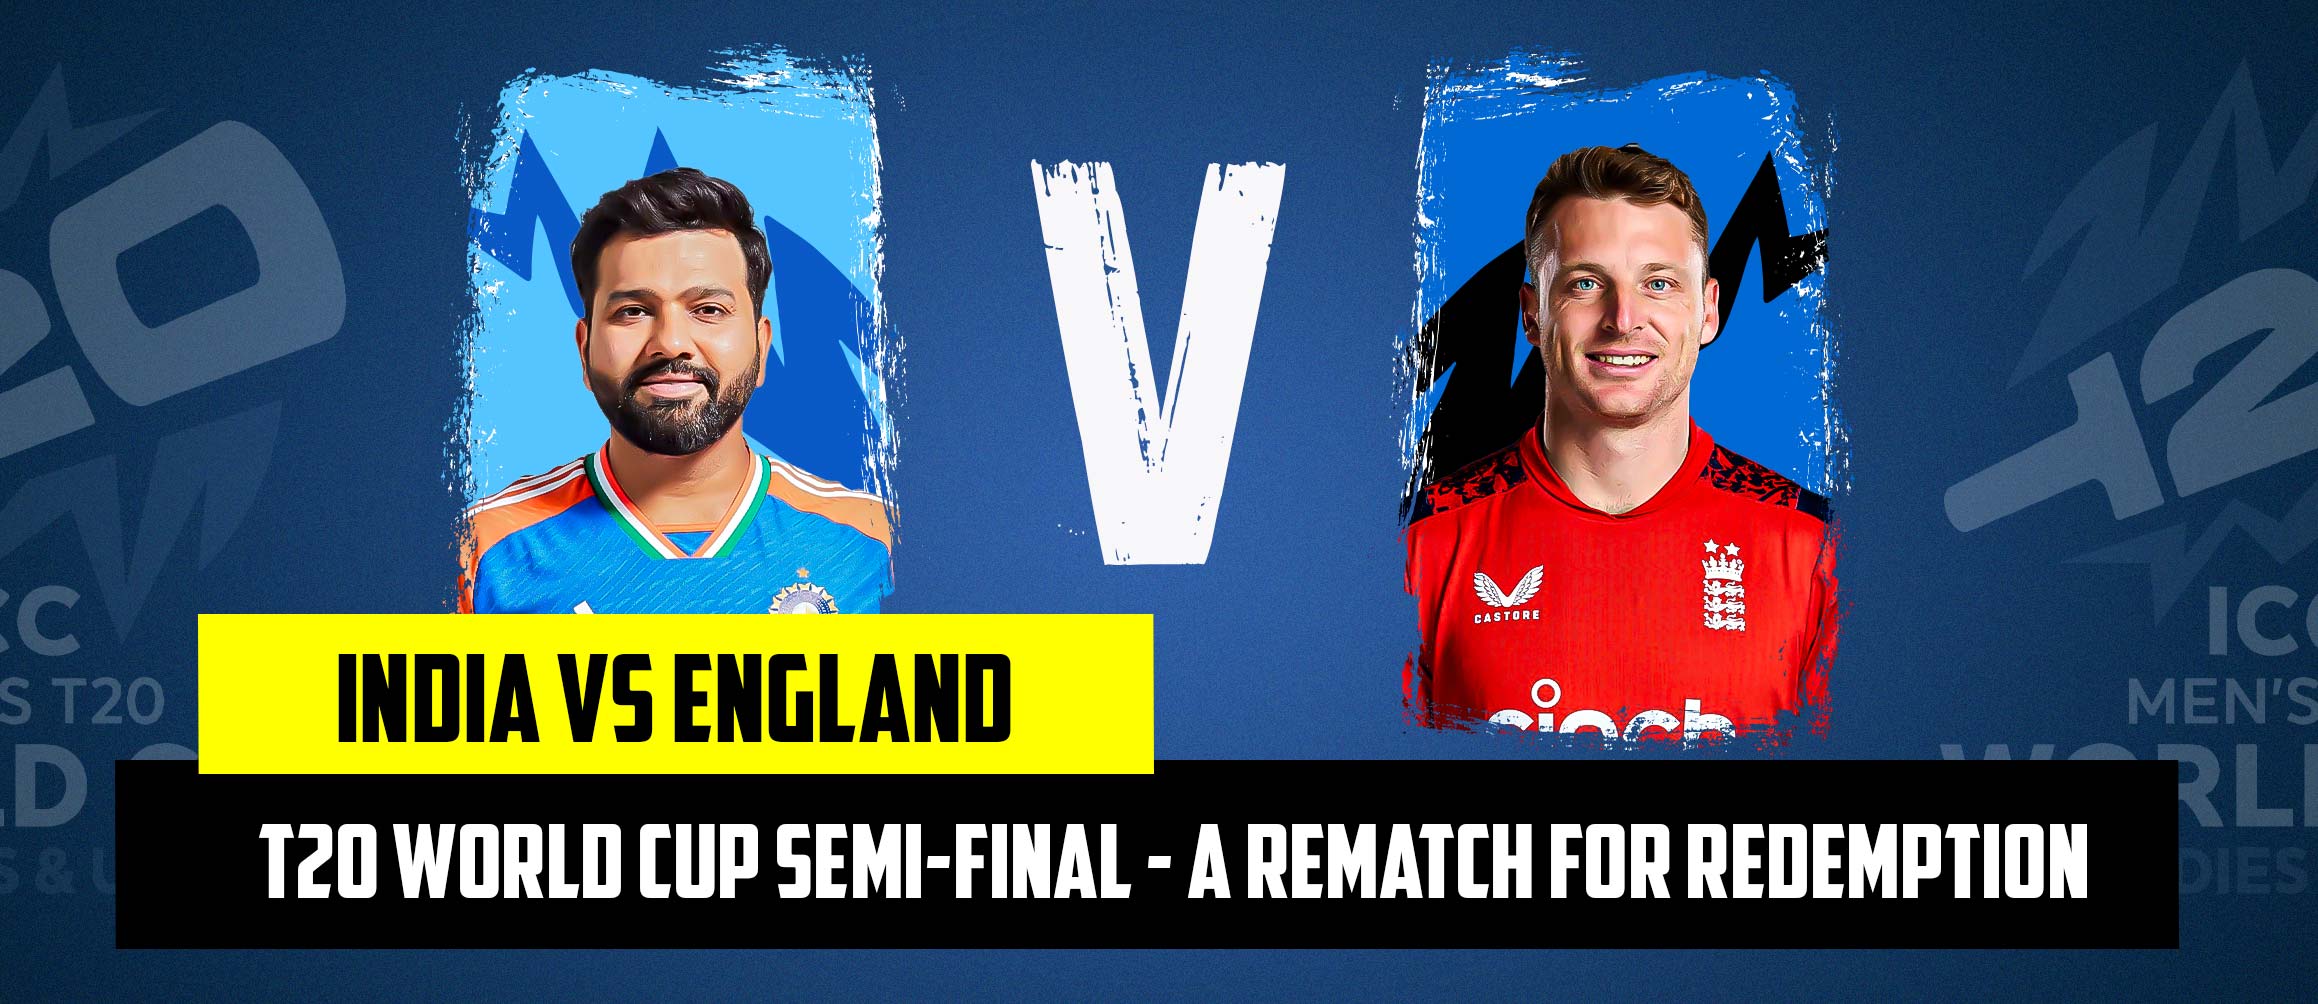 India vs England T20 World Cup Semi-Final – A Rematch for Redemption